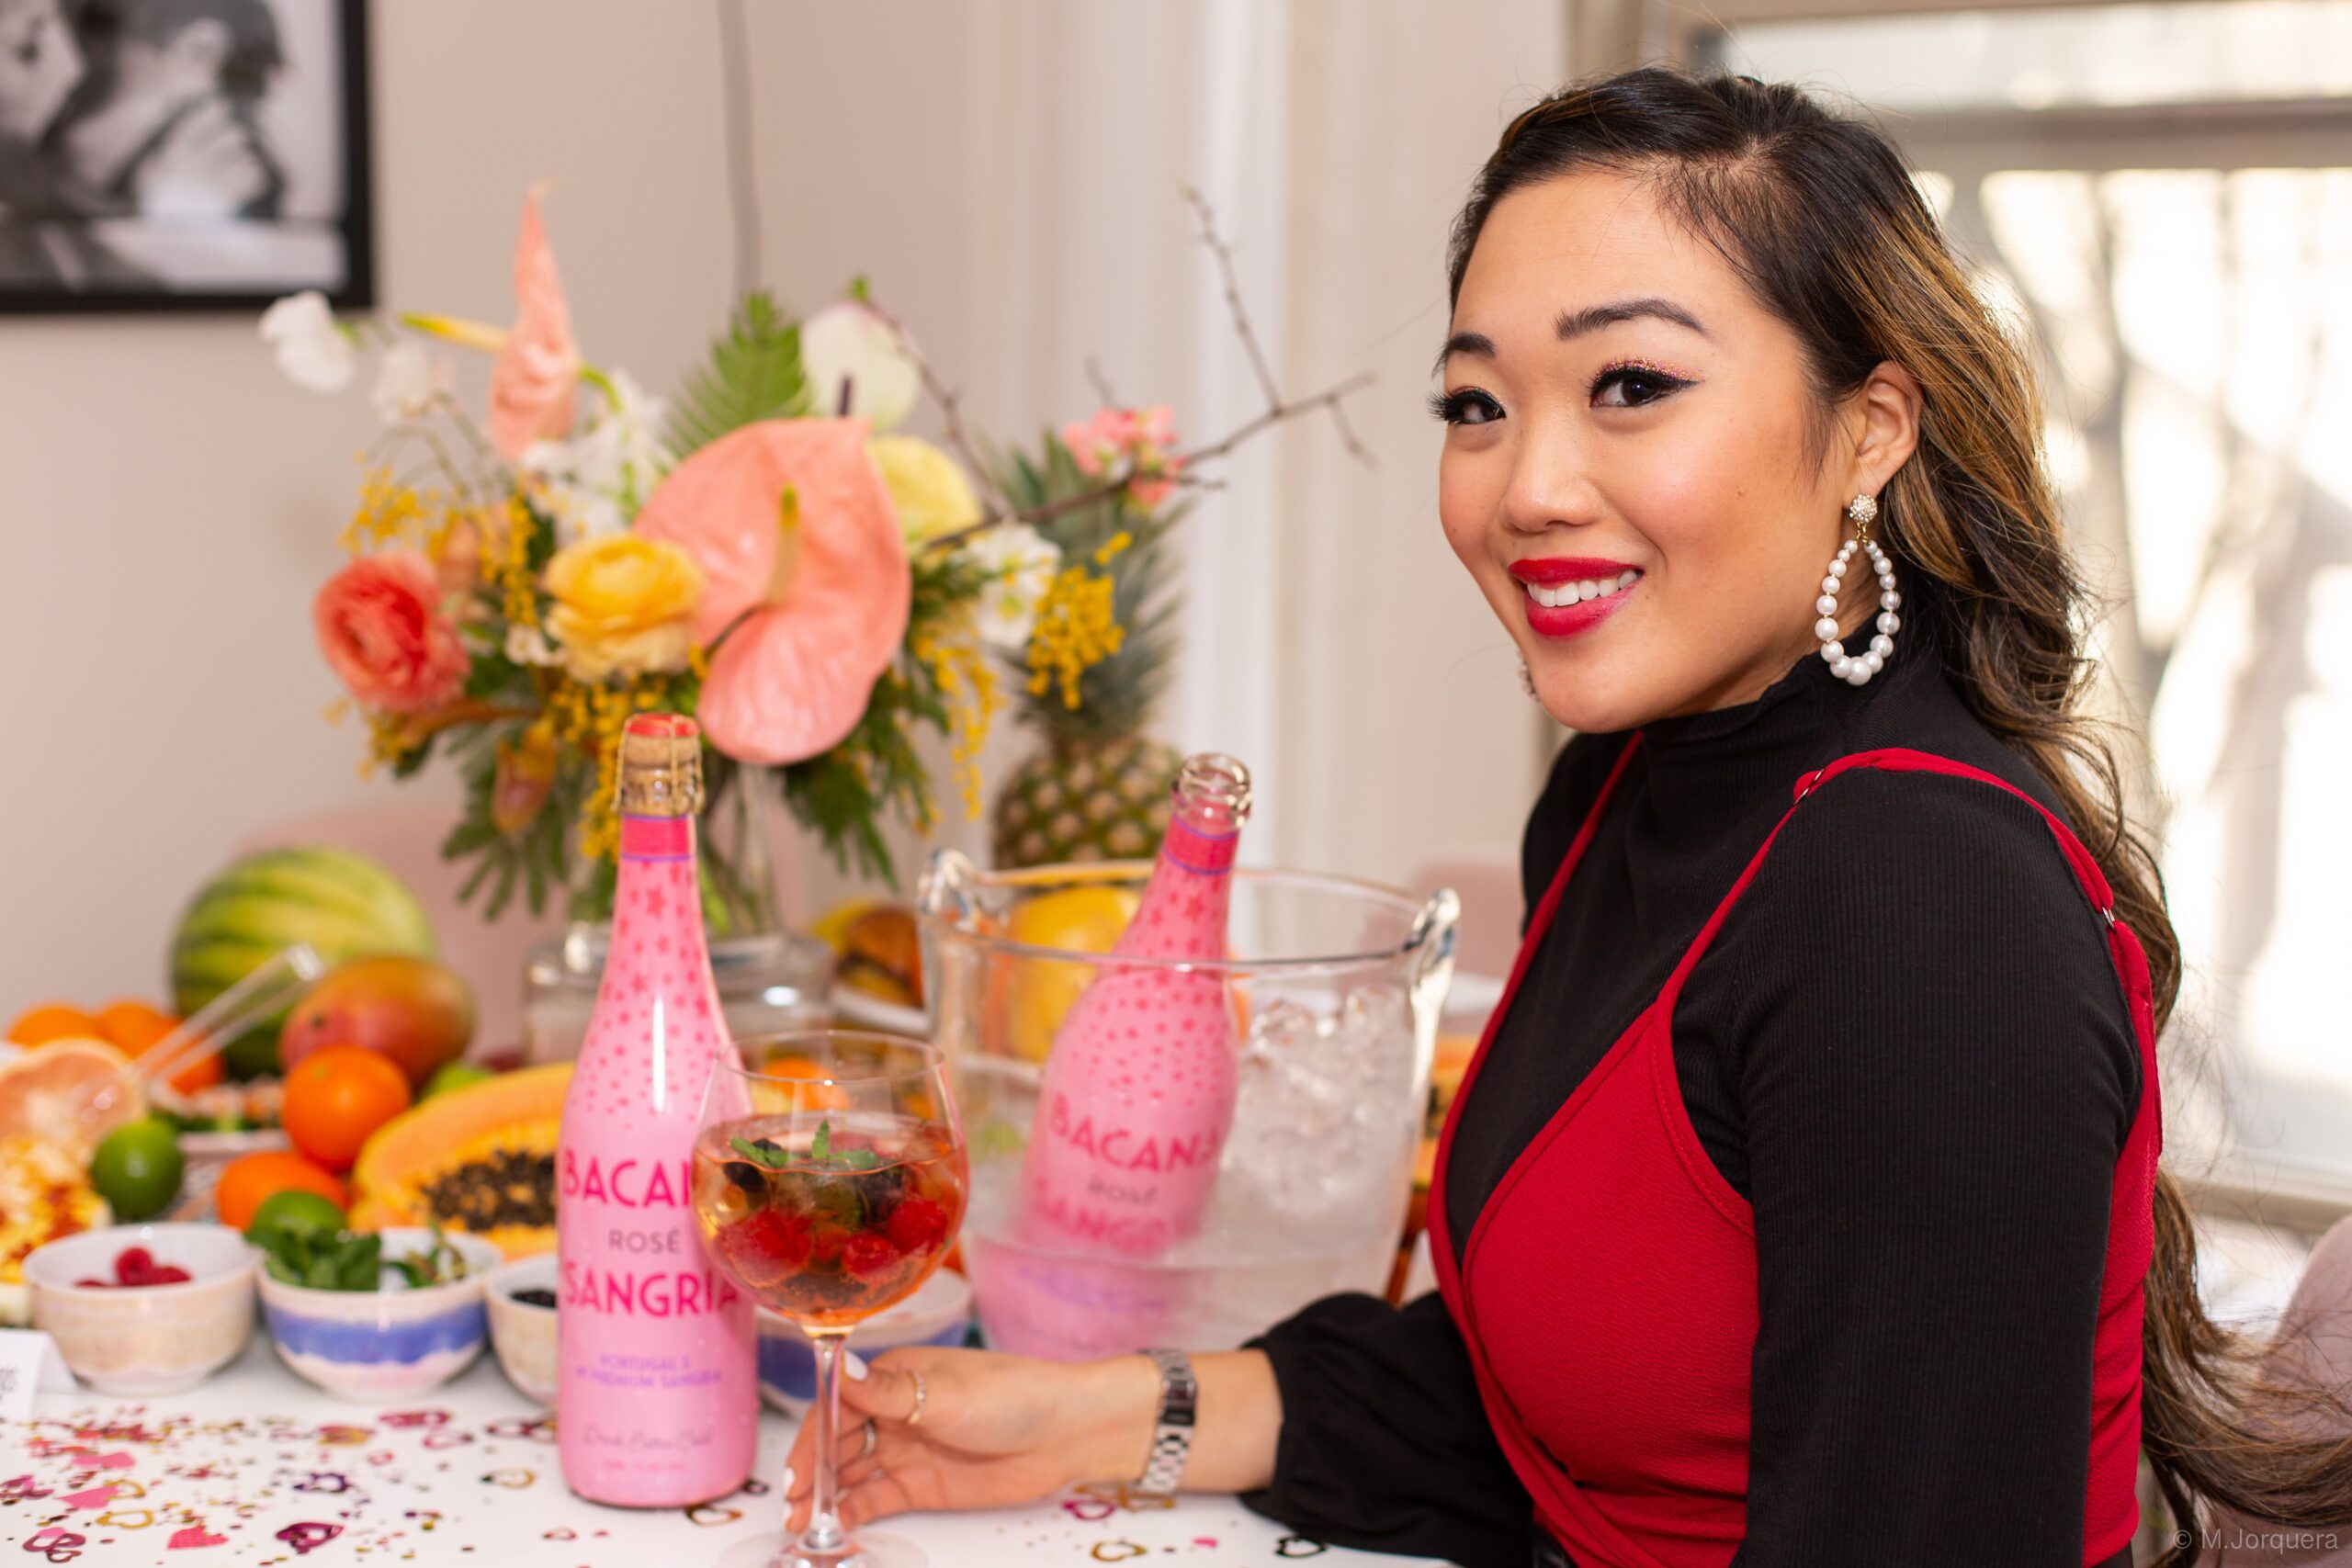 GALENTINE'S DAY PARTY GUEST LIST INFLUENCER GRACE LEE